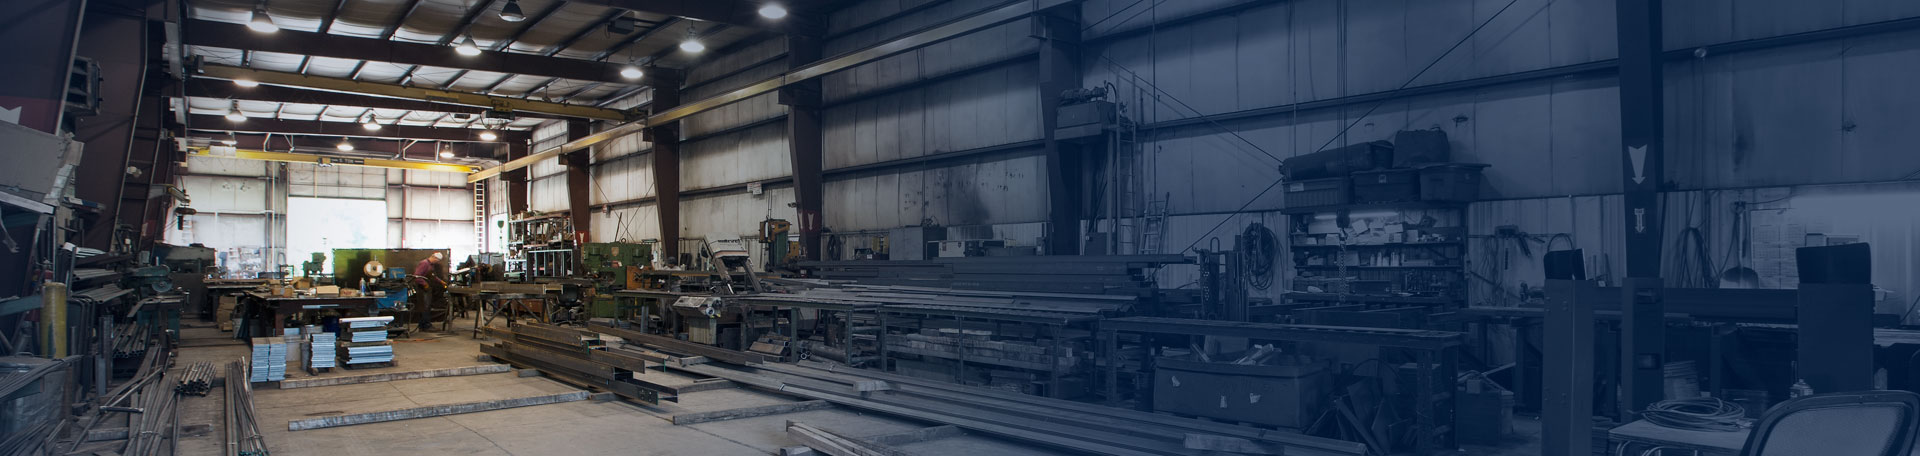 Mechanical and Industrial Steel Services, Inc.